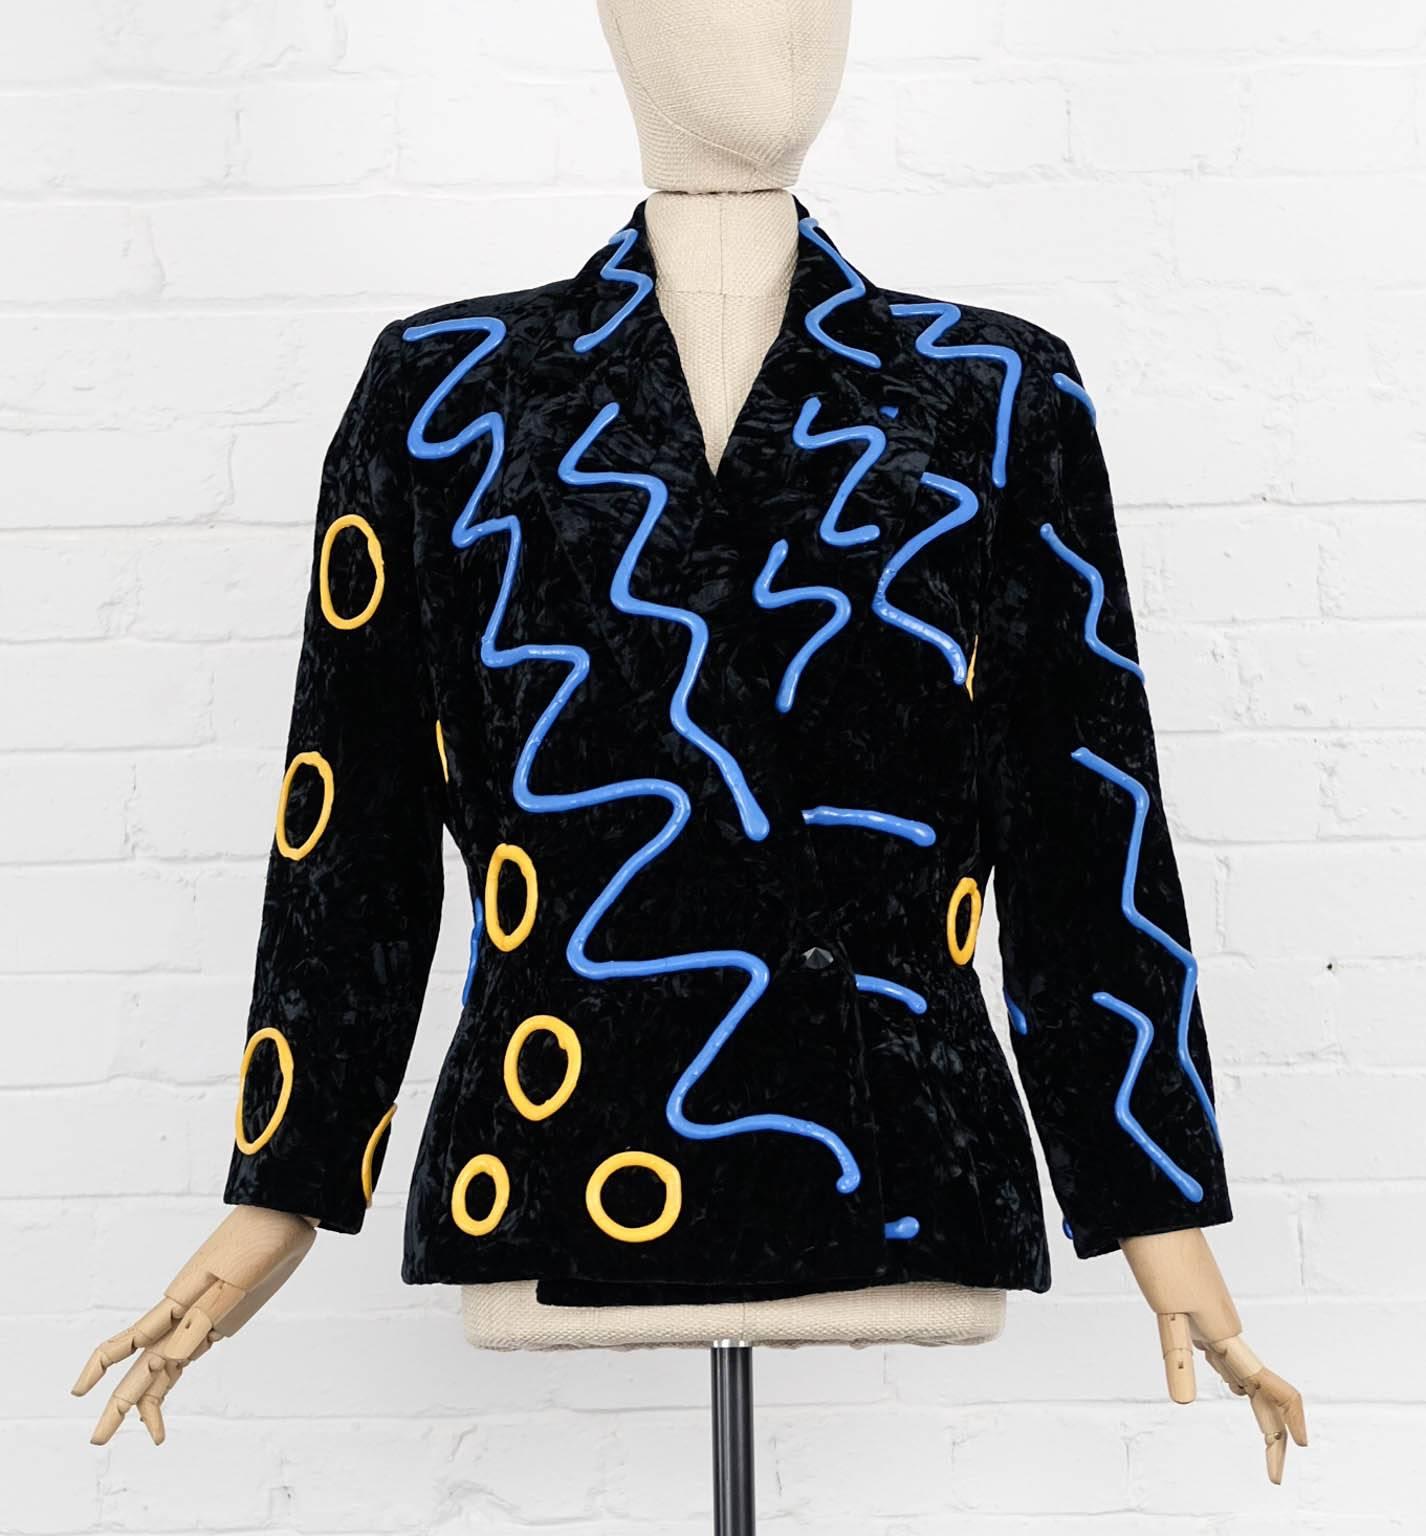 Black crushed velvet jazzy patterned jacket from Kansai Yamamoto Vintage featuring a wide lapel, long sleeves, a front button fastening and a blue and yellow rubber jazzy pattern. Excellent condition.



Shoulder:
41 cm
Sleeve length:
53 cm